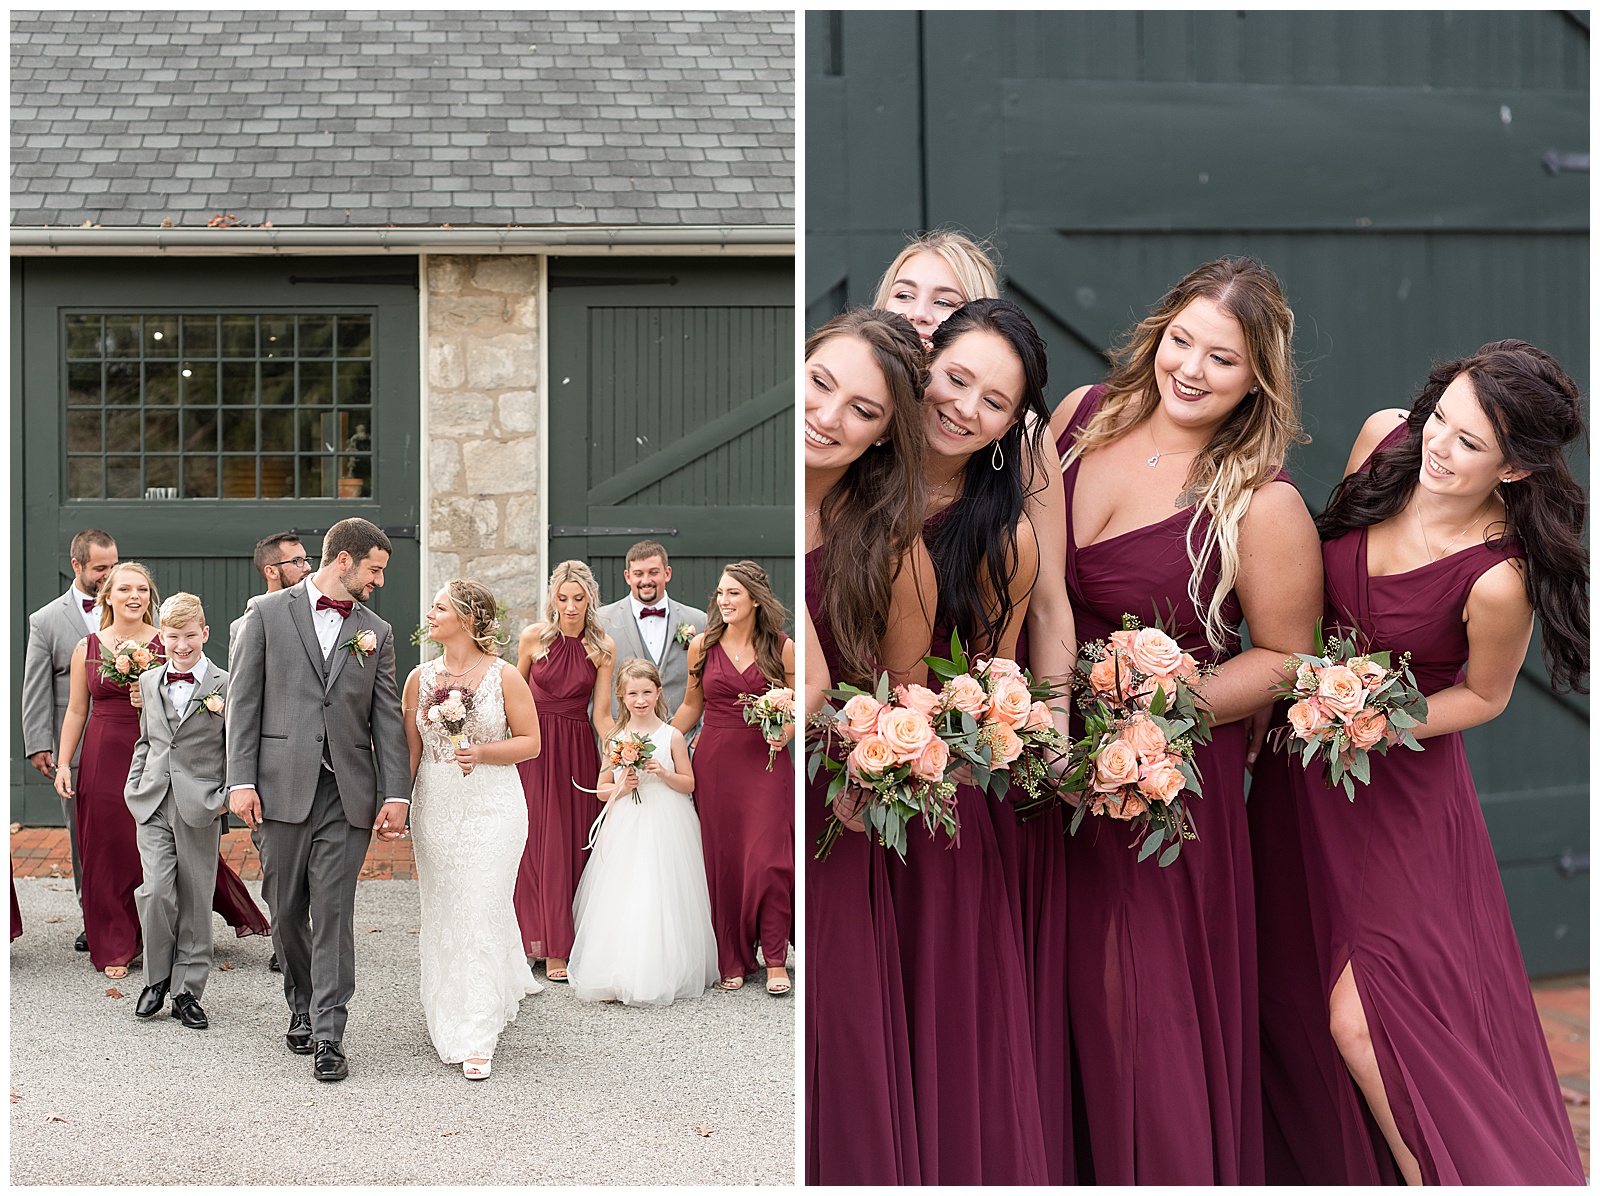 bride and groom with bridal party wearing maroon and gray in front of stone building